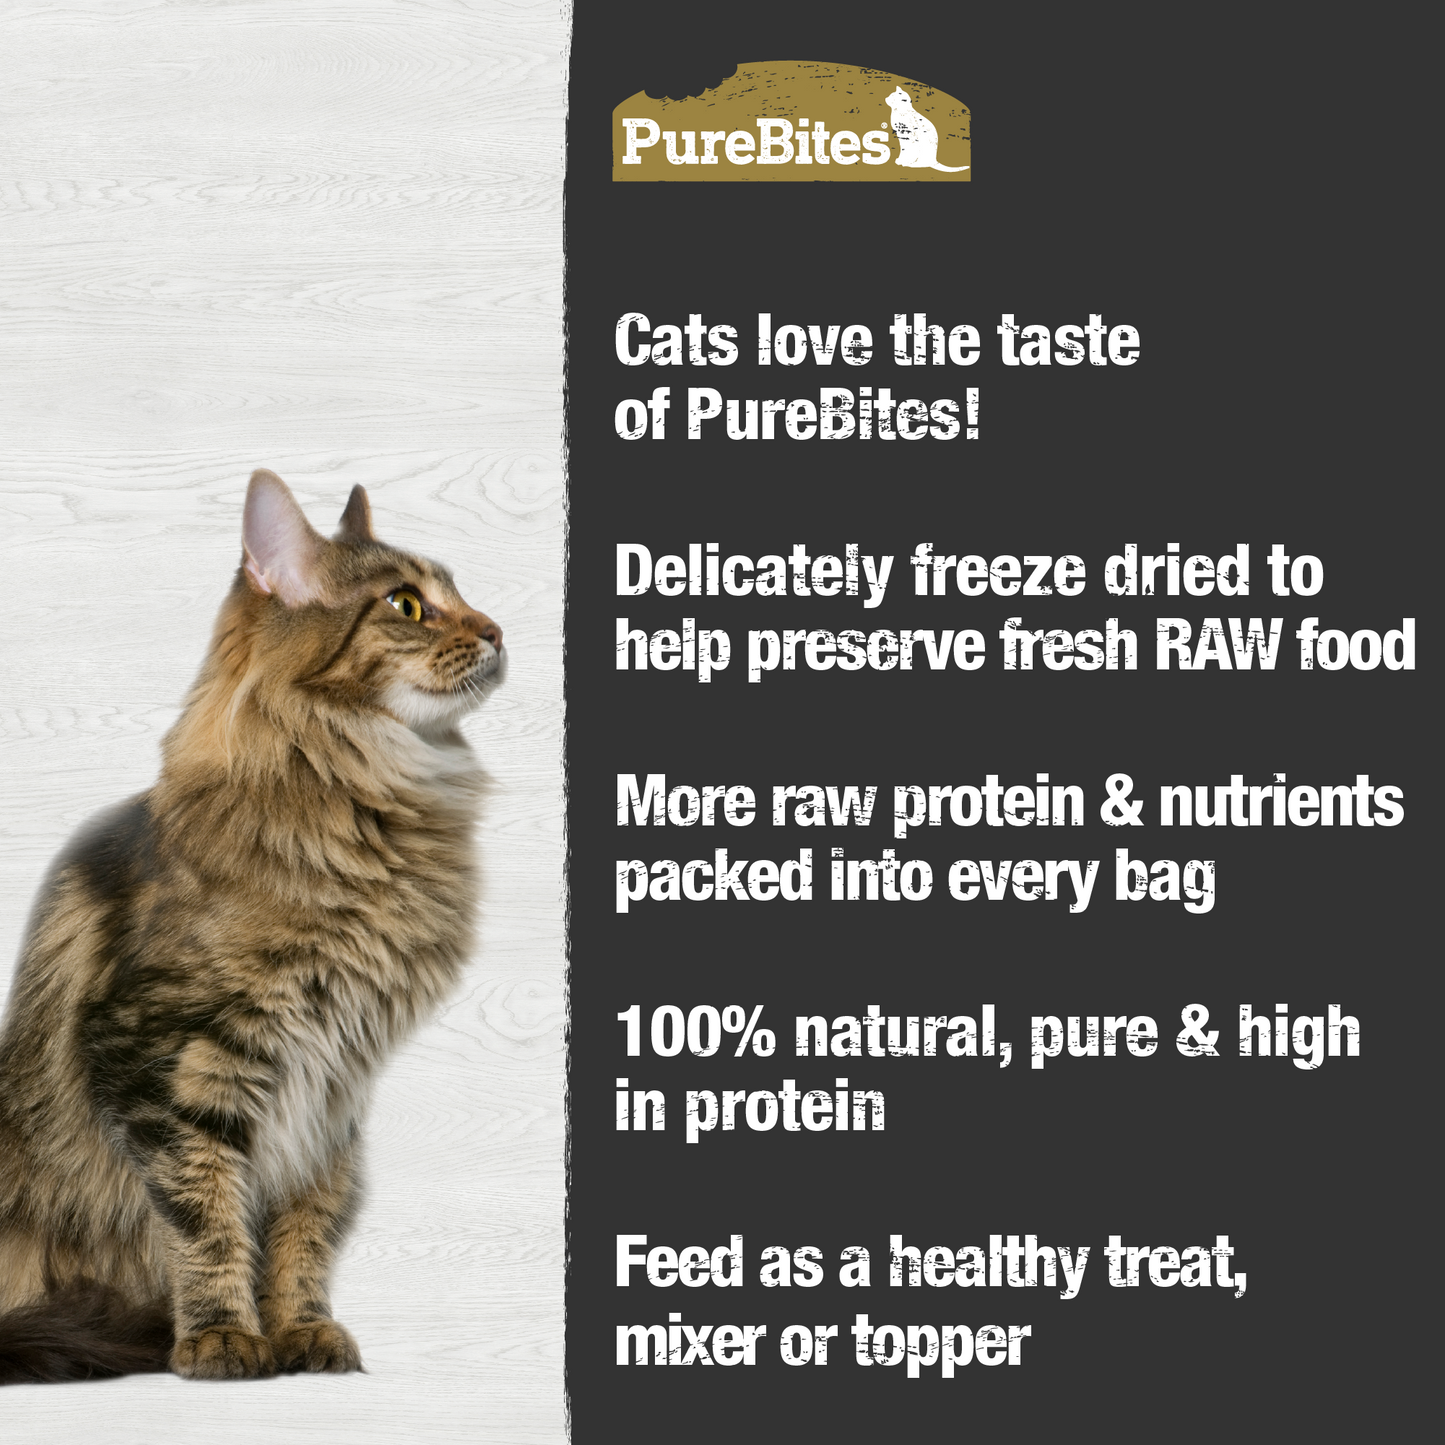 Made fresh & pure means more RAW protein and nutrients packed into every bag. Our chicken & duck is freeze dried to help preserve its RAW taste, and nutrition, and mirror a cat’s ancestral diet